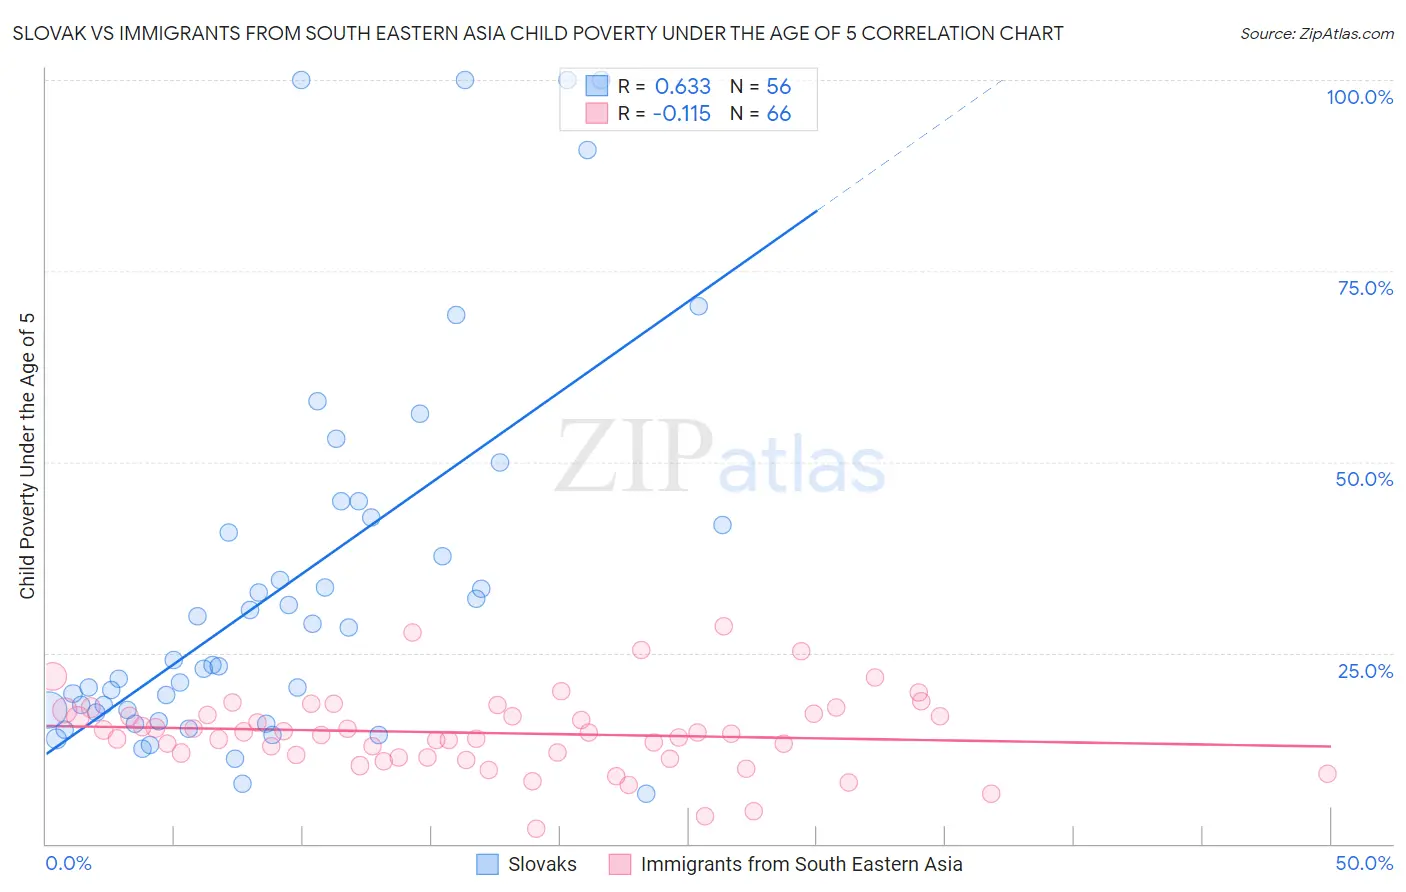 Slovak vs Immigrants from South Eastern Asia Child Poverty Under the Age of 5